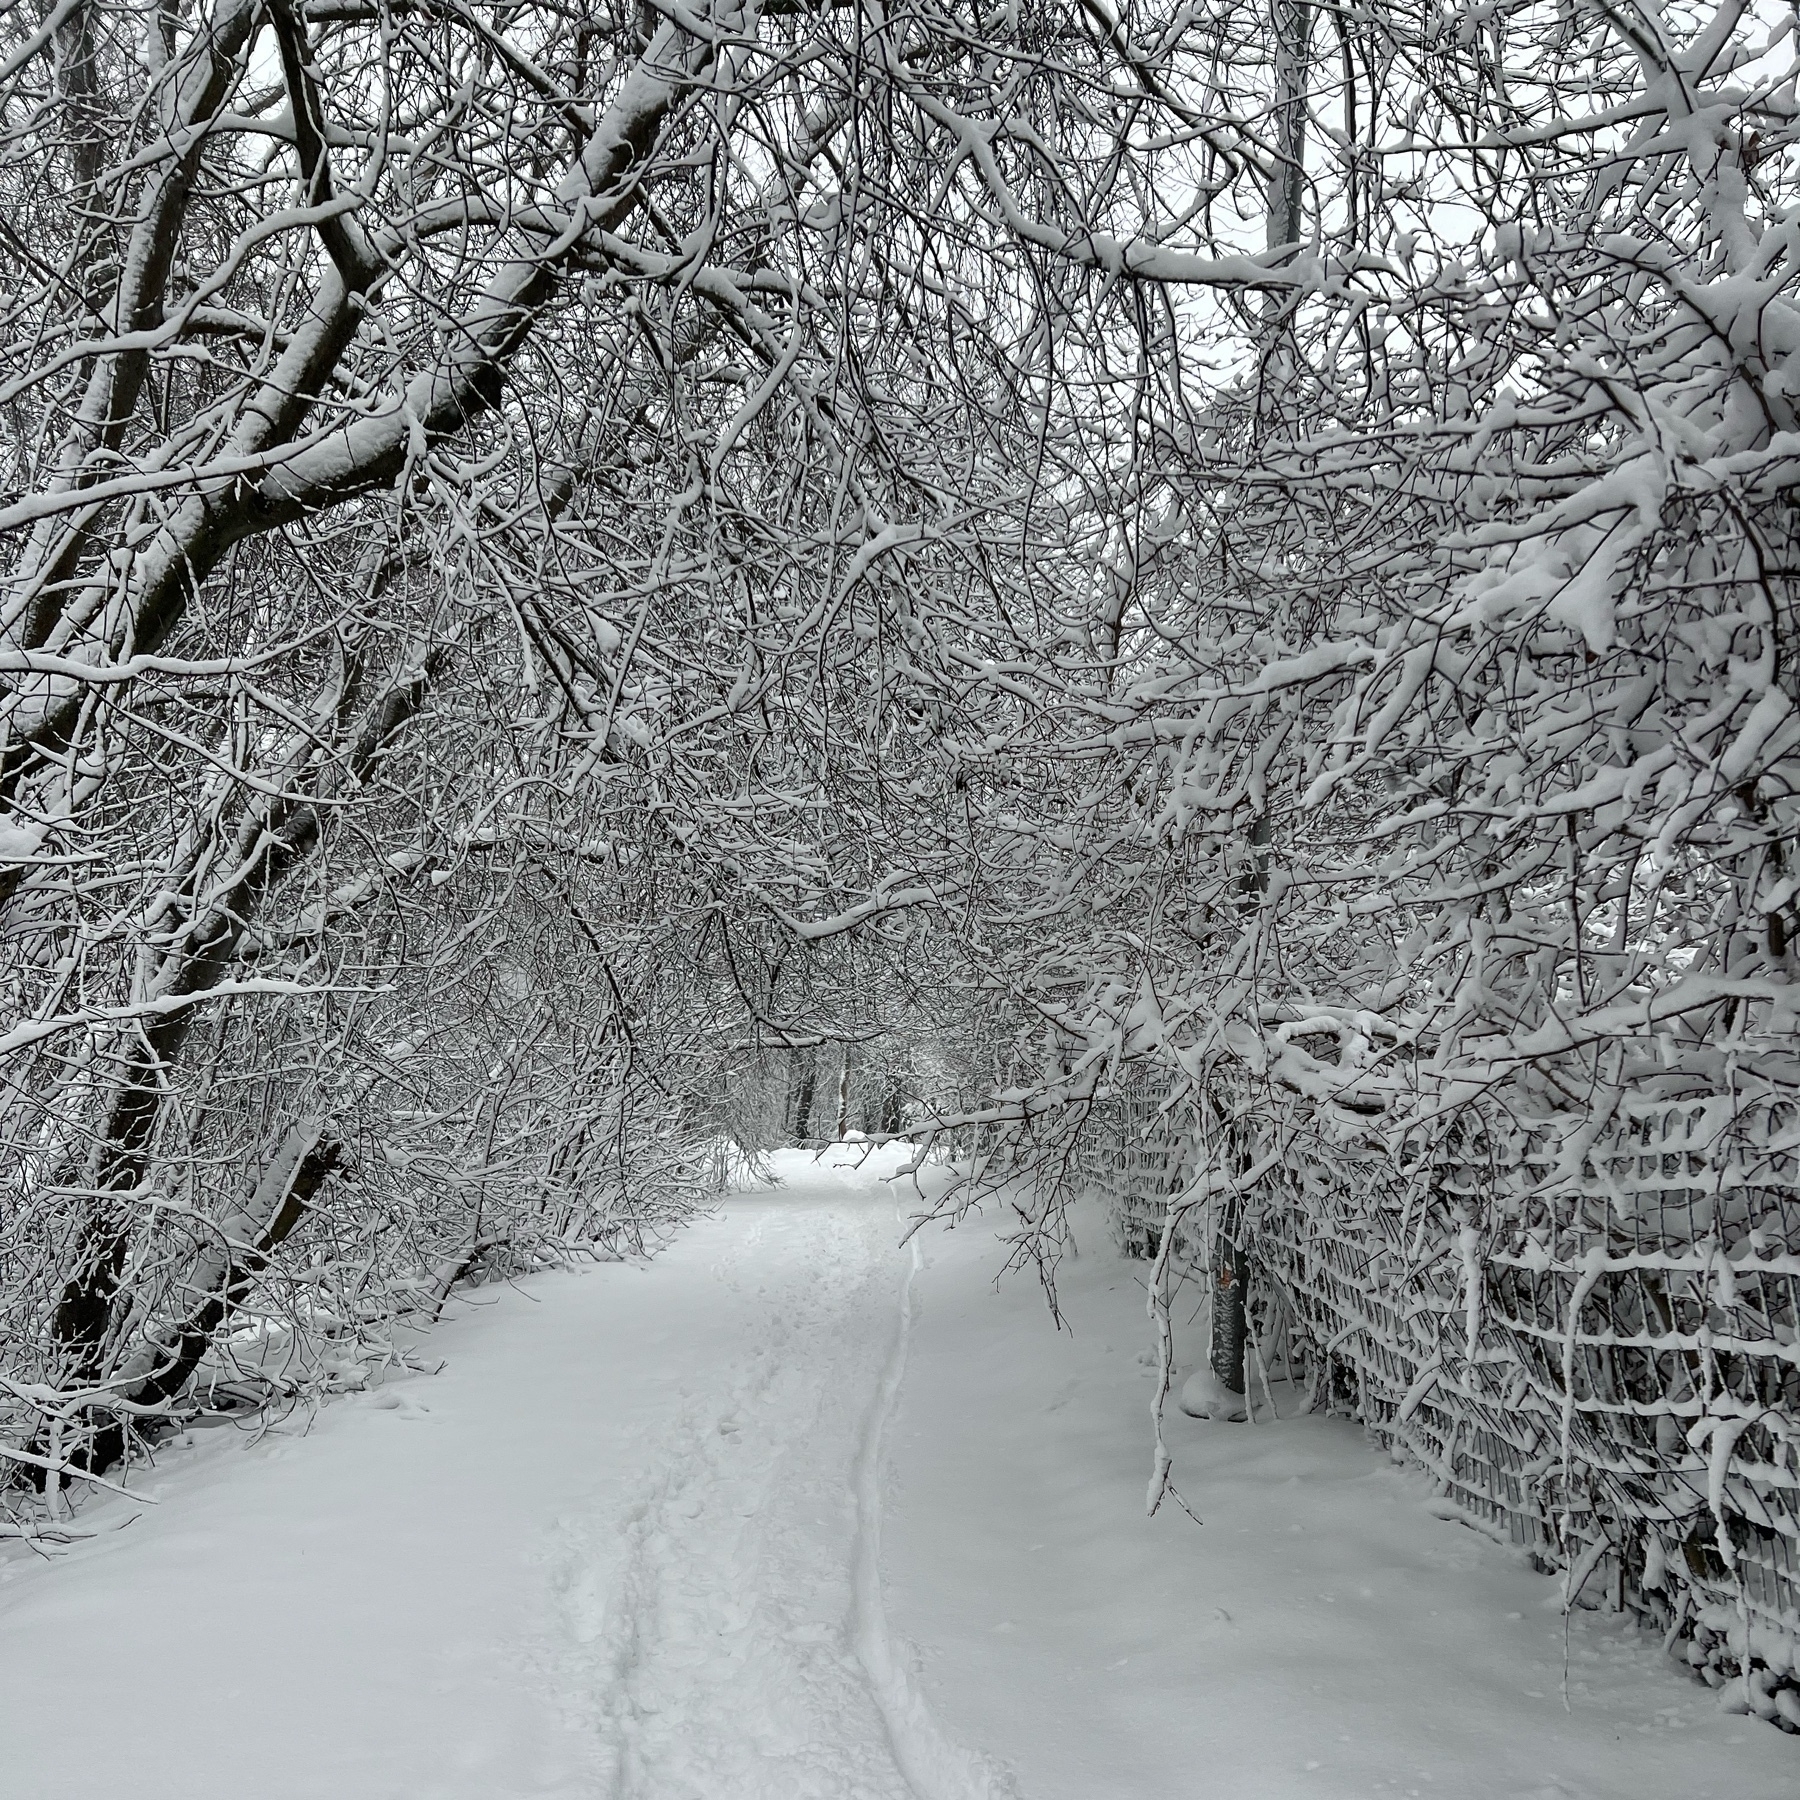 snowy path surrounded by trees covered in snow